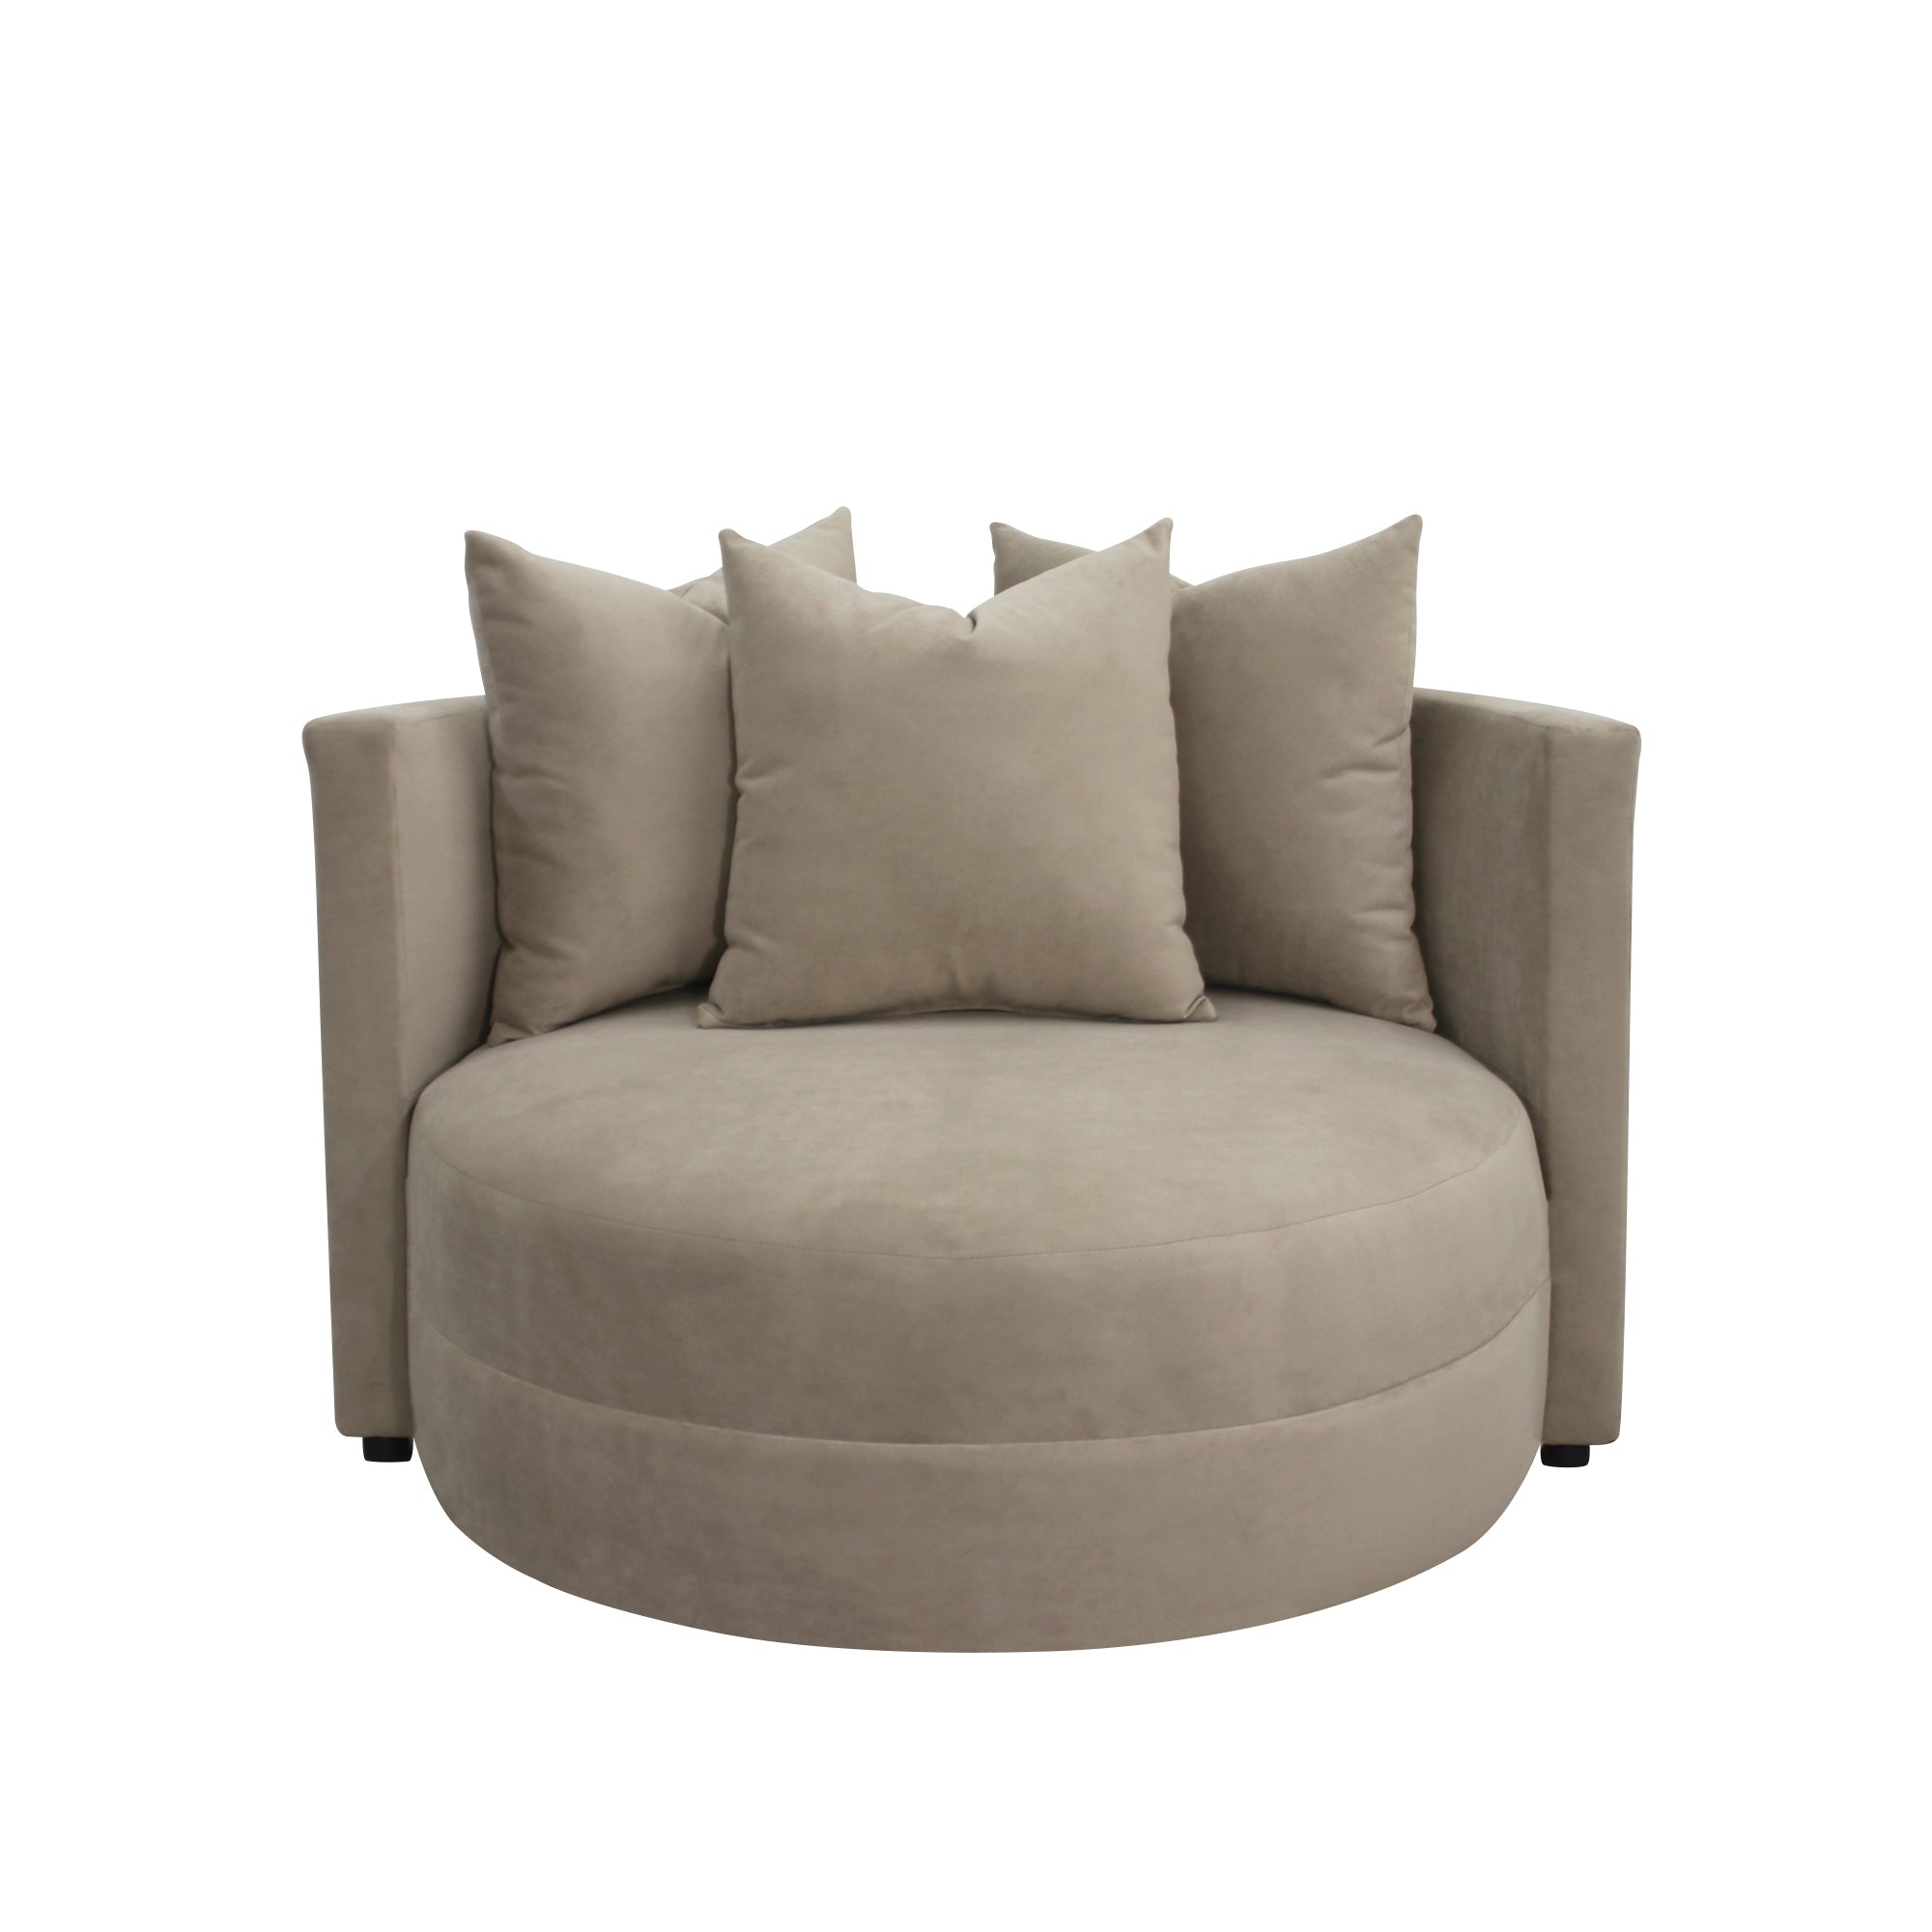 Round Seating Upholstered Living Room Chair